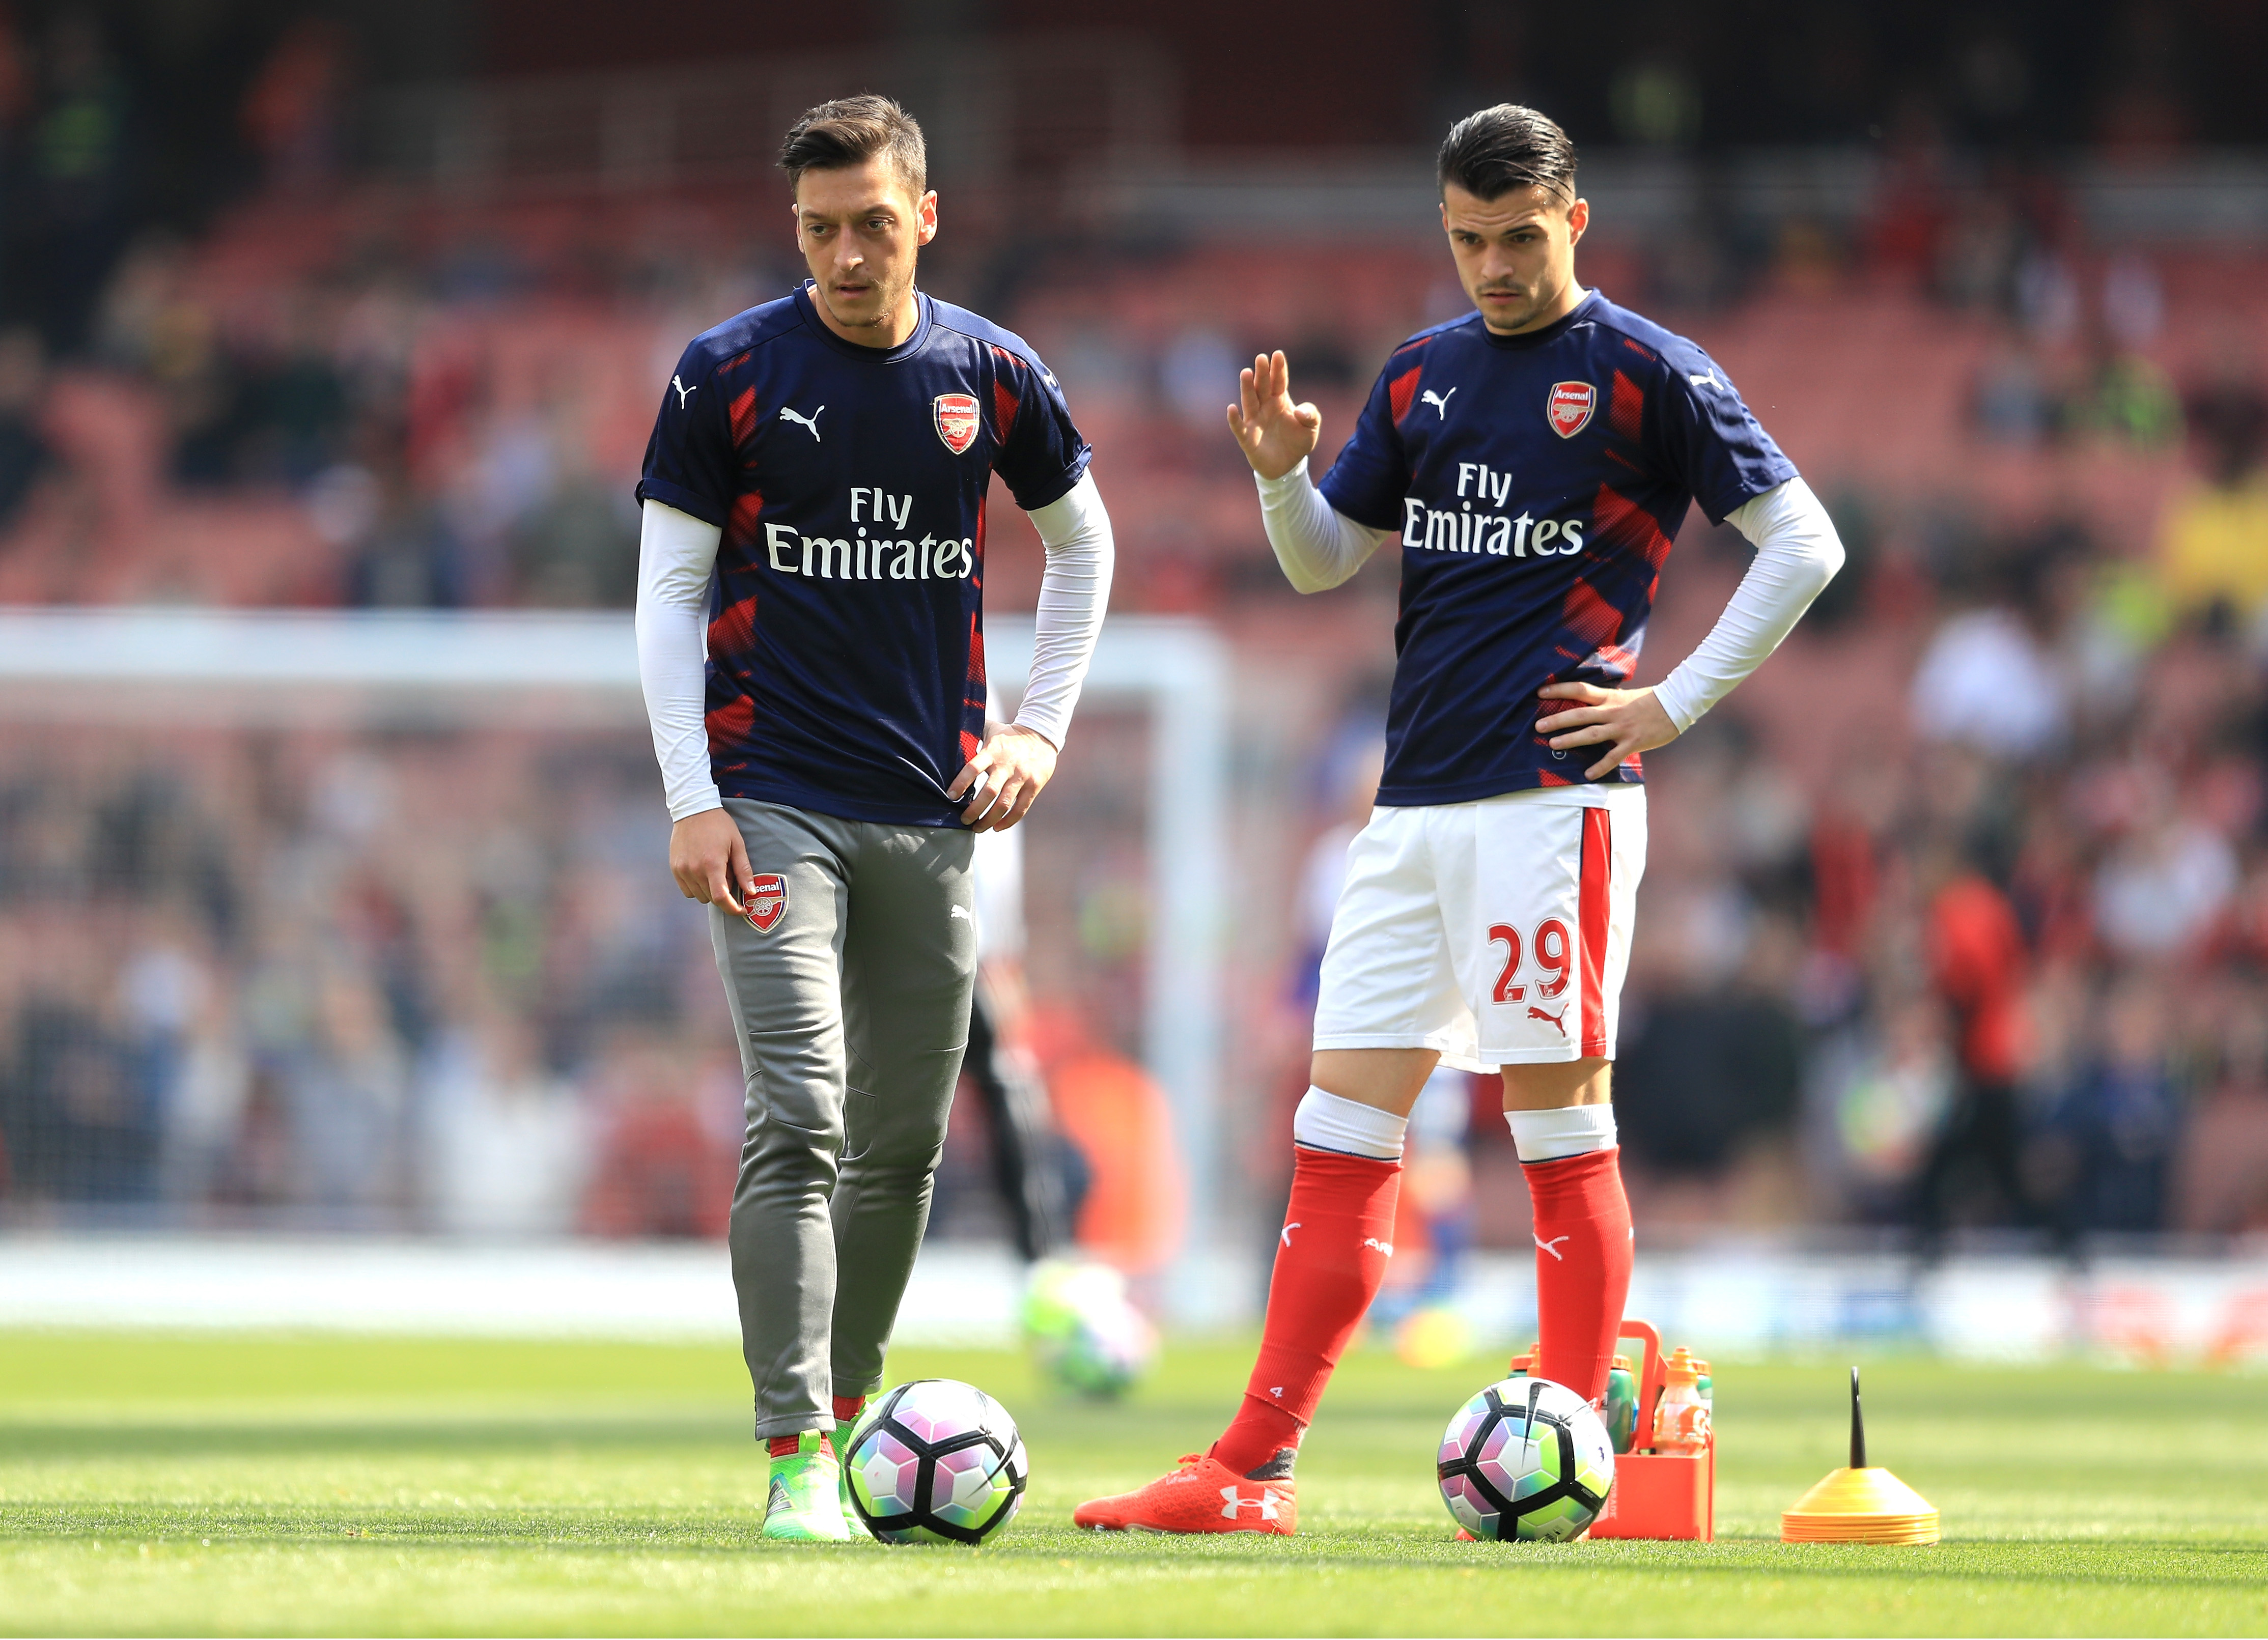 LONDON, ENGLAND - MAY 07: Mesut Ozil of Arsenal and Granit Xhaka of Arsenal speak while they are warm up prior to the Premier League match between Arsenal and Manchester United at the Emirates Stadium on May 7, 2017 in London, England.  (Photo by Richard Heathcote/Getty Images)